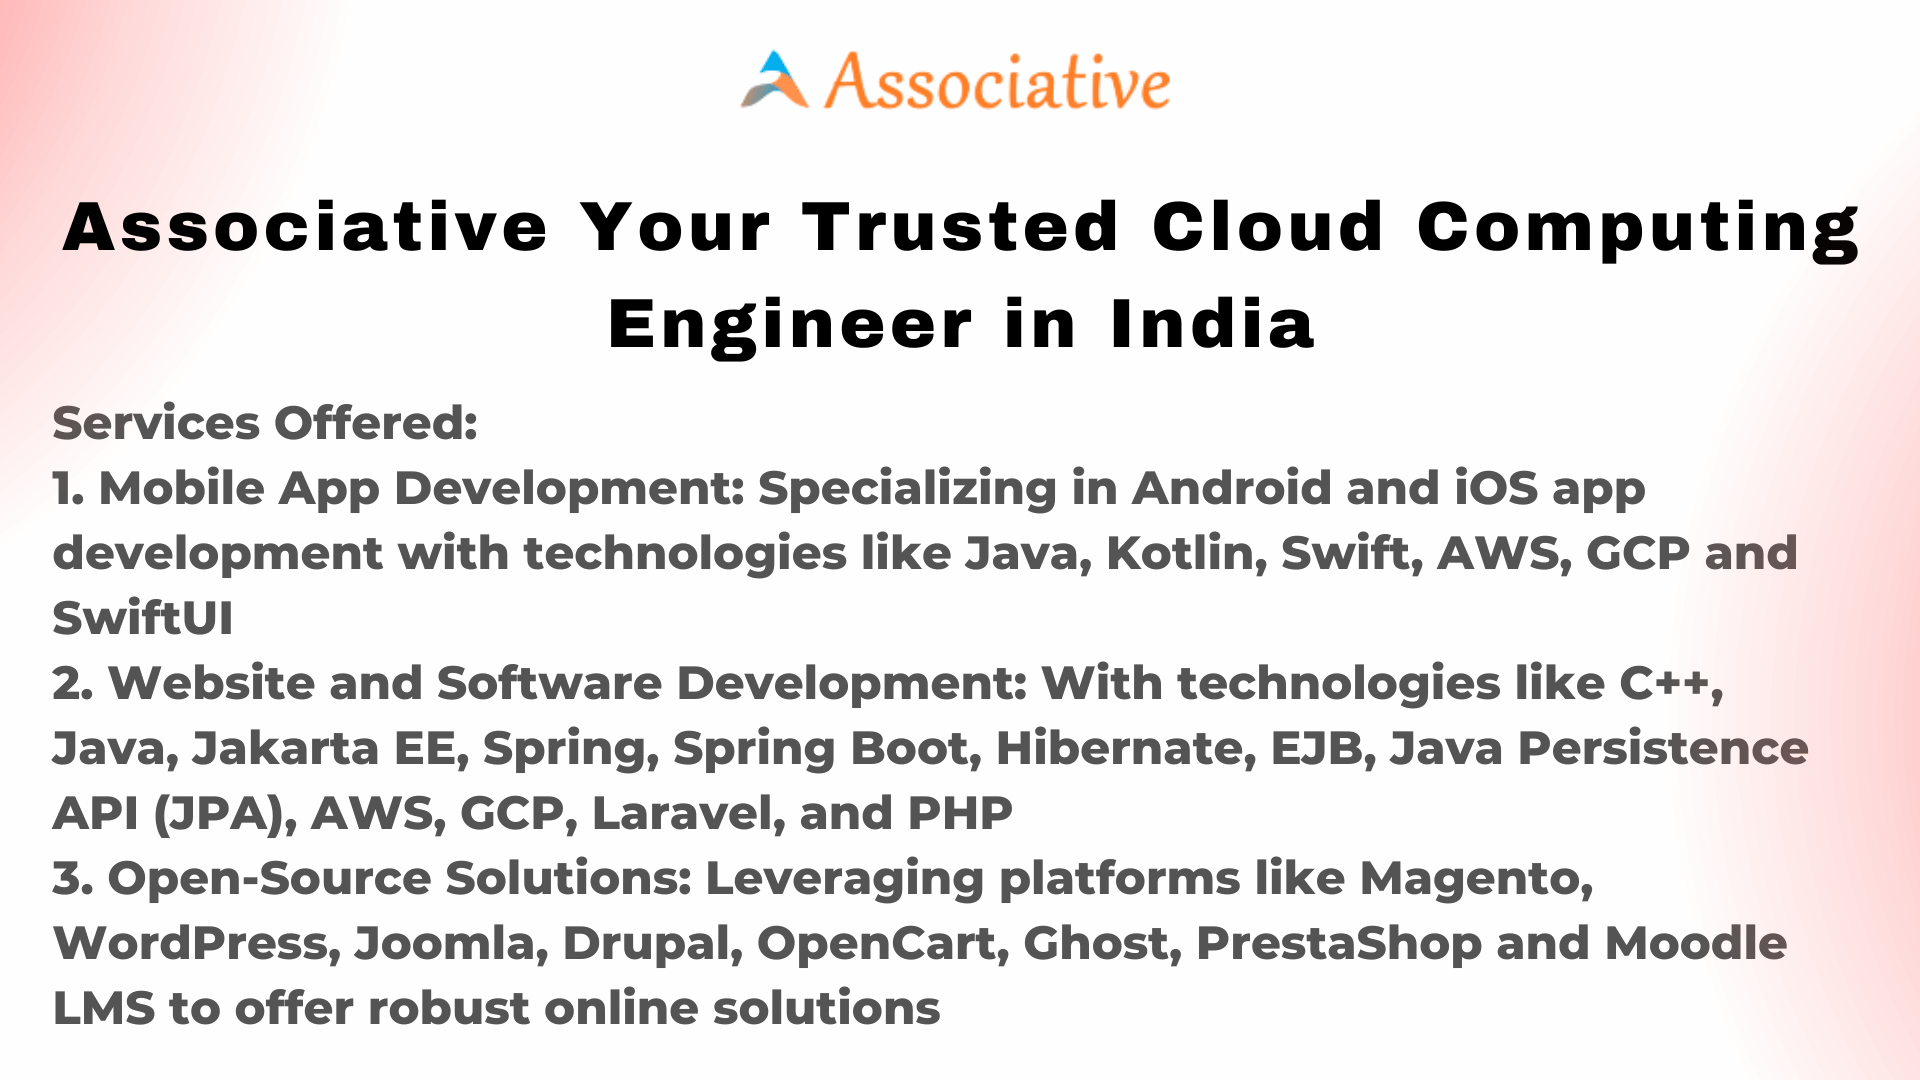 Associative Your Trusted Cloud Computing Engineer in India